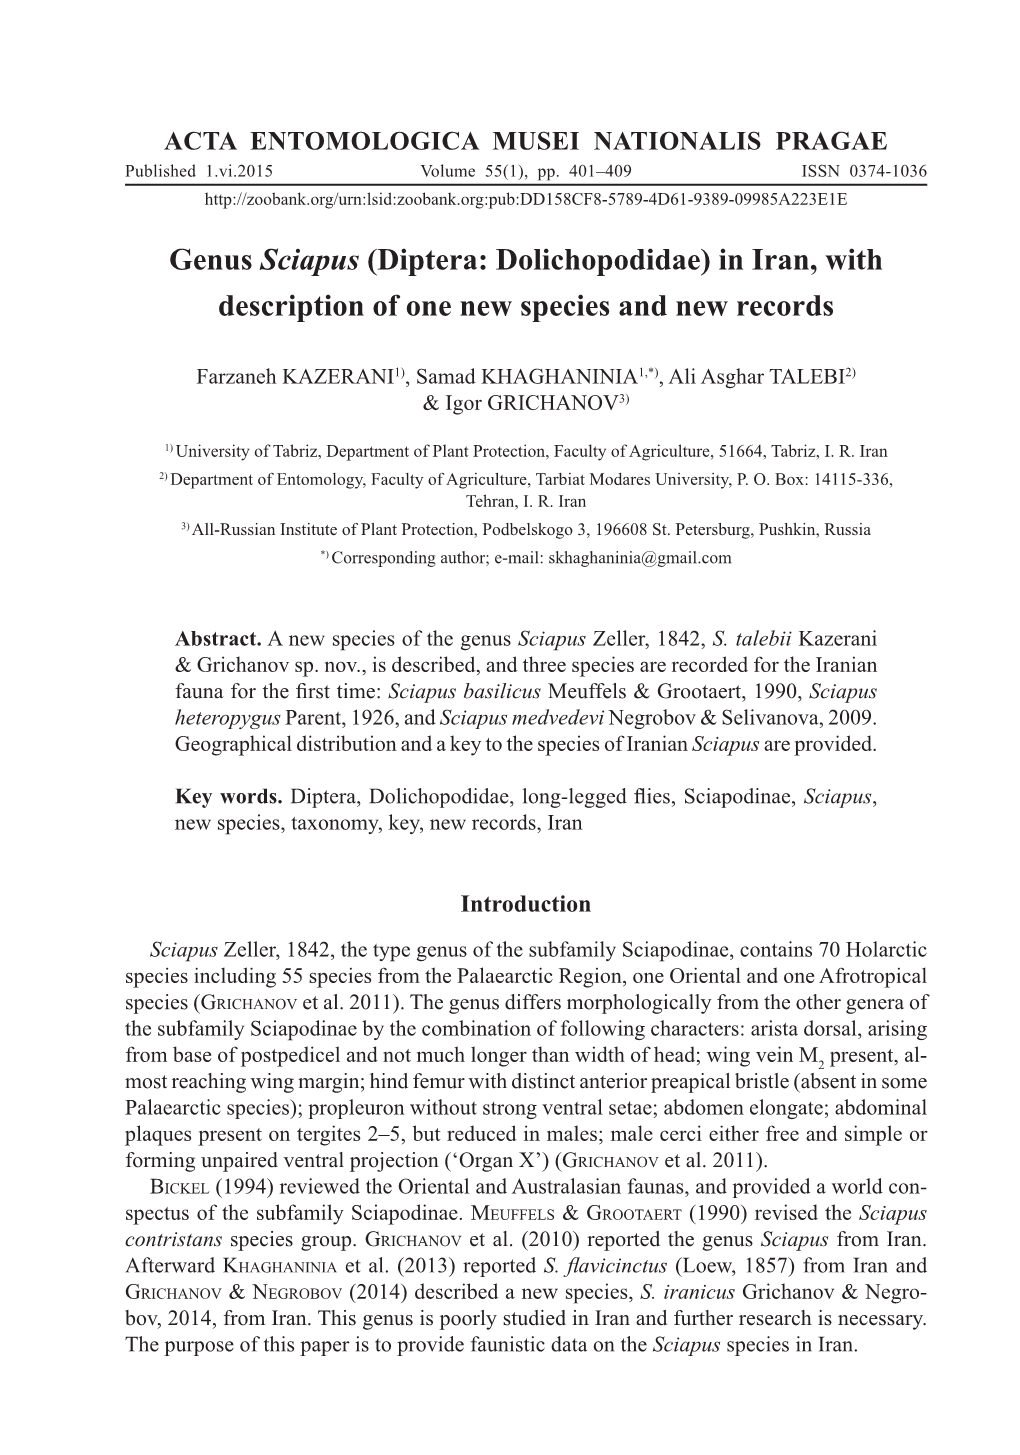 Genus Sciapus (Diptera: Dolichopodidae) in Iran, with Description of One New Species and New Records